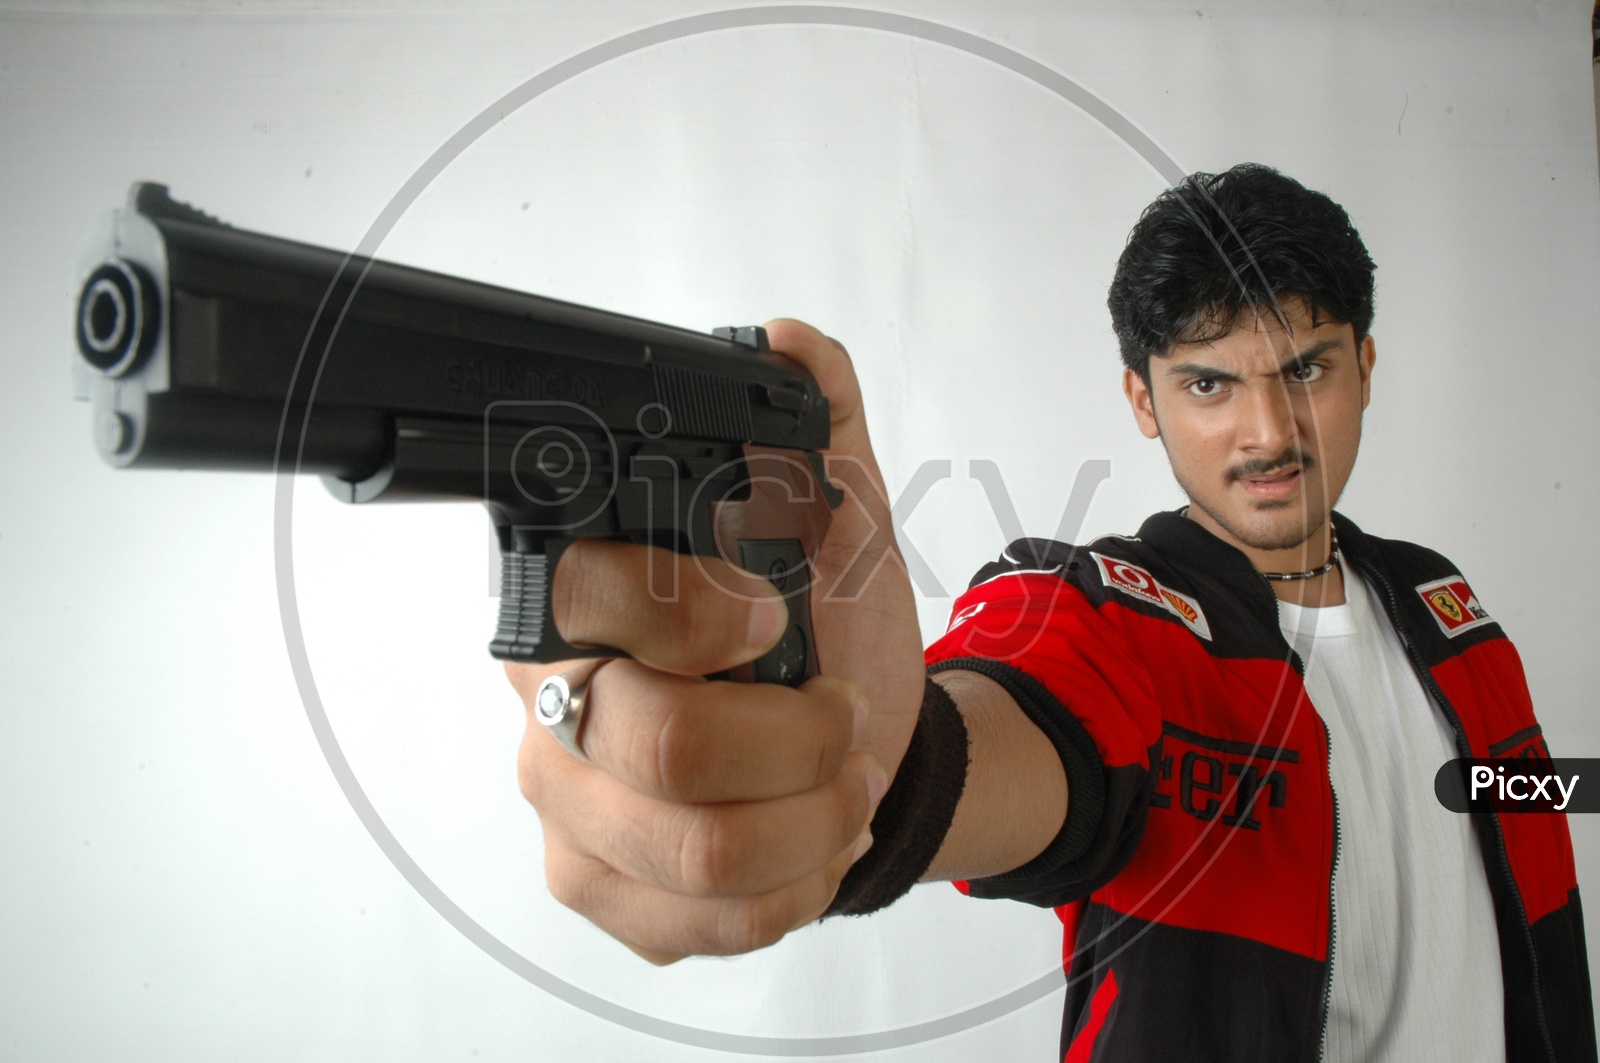 A Young Indian Man Holding Gun or Pistol  And  Posing  On an Isolated White Background